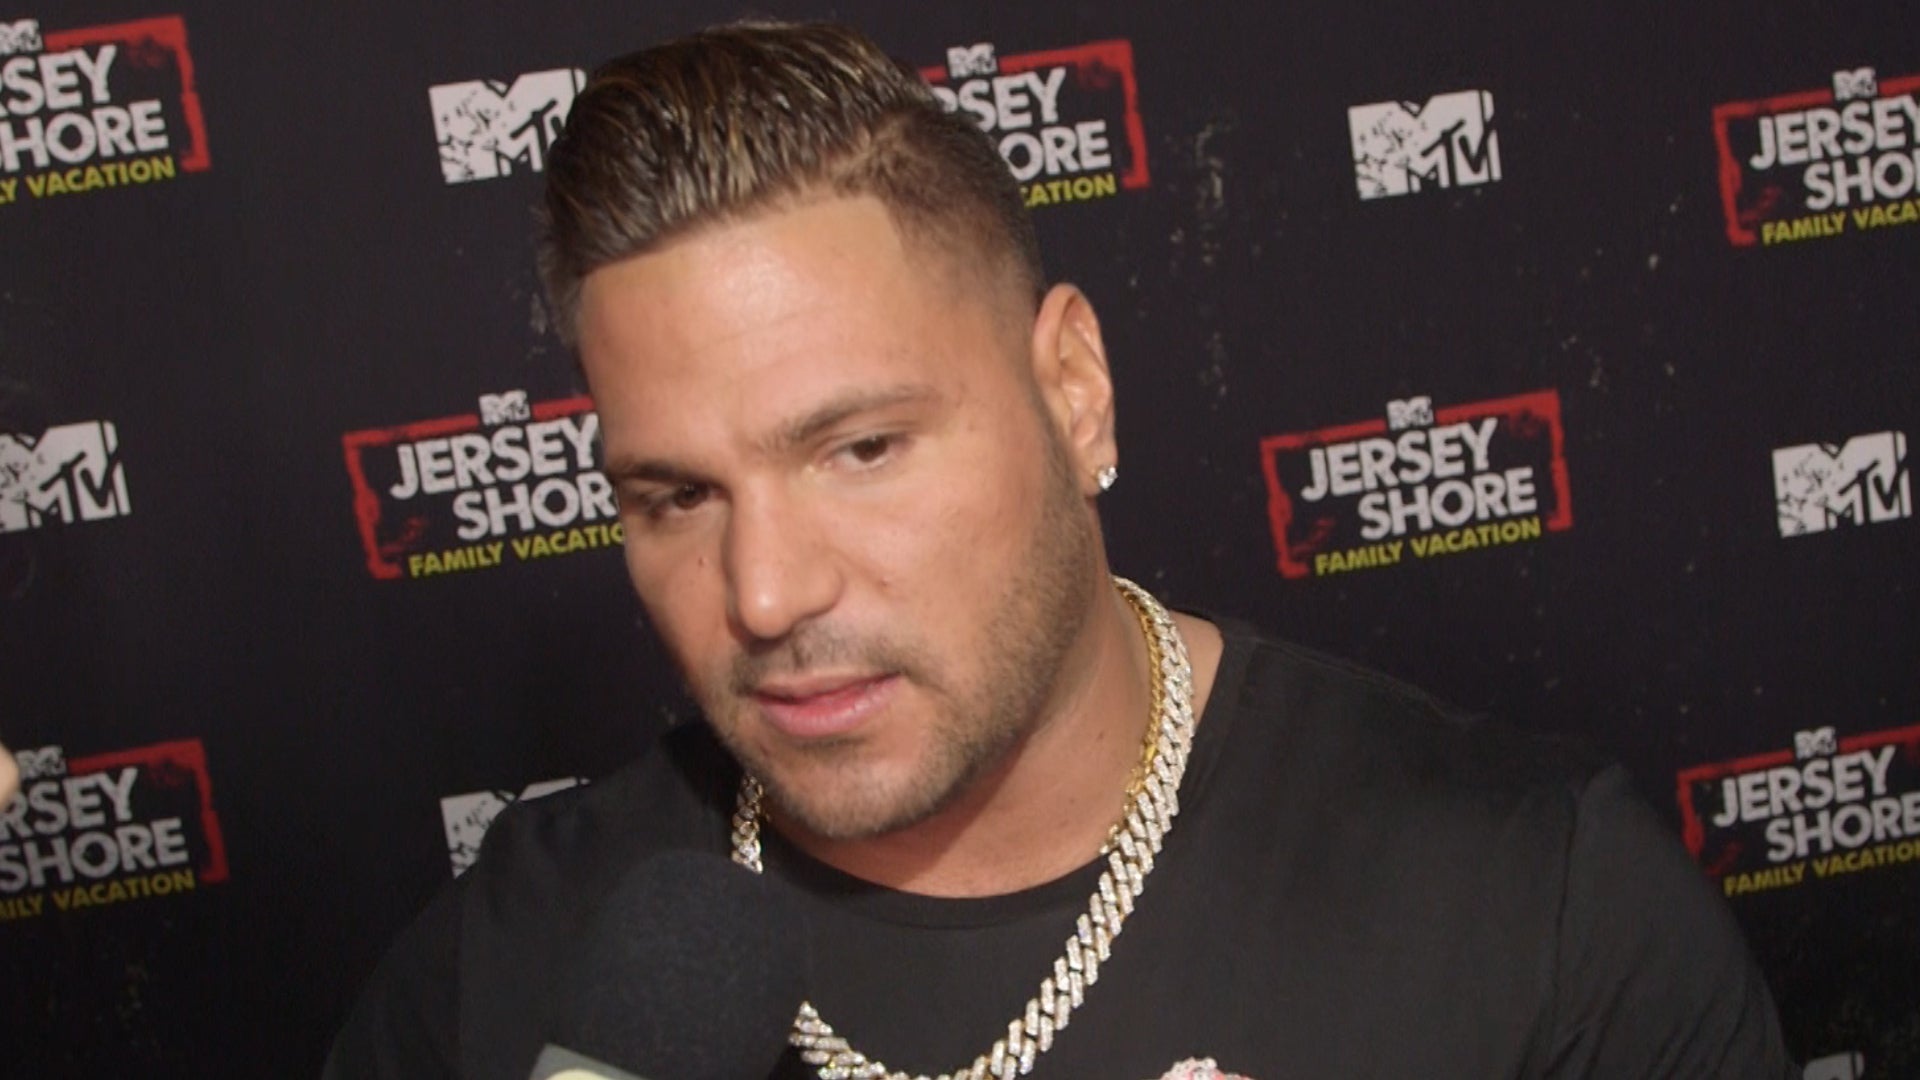 TV, News, Ronnie Ortiz-Magro, Jersey Shore, Couples, Splits.